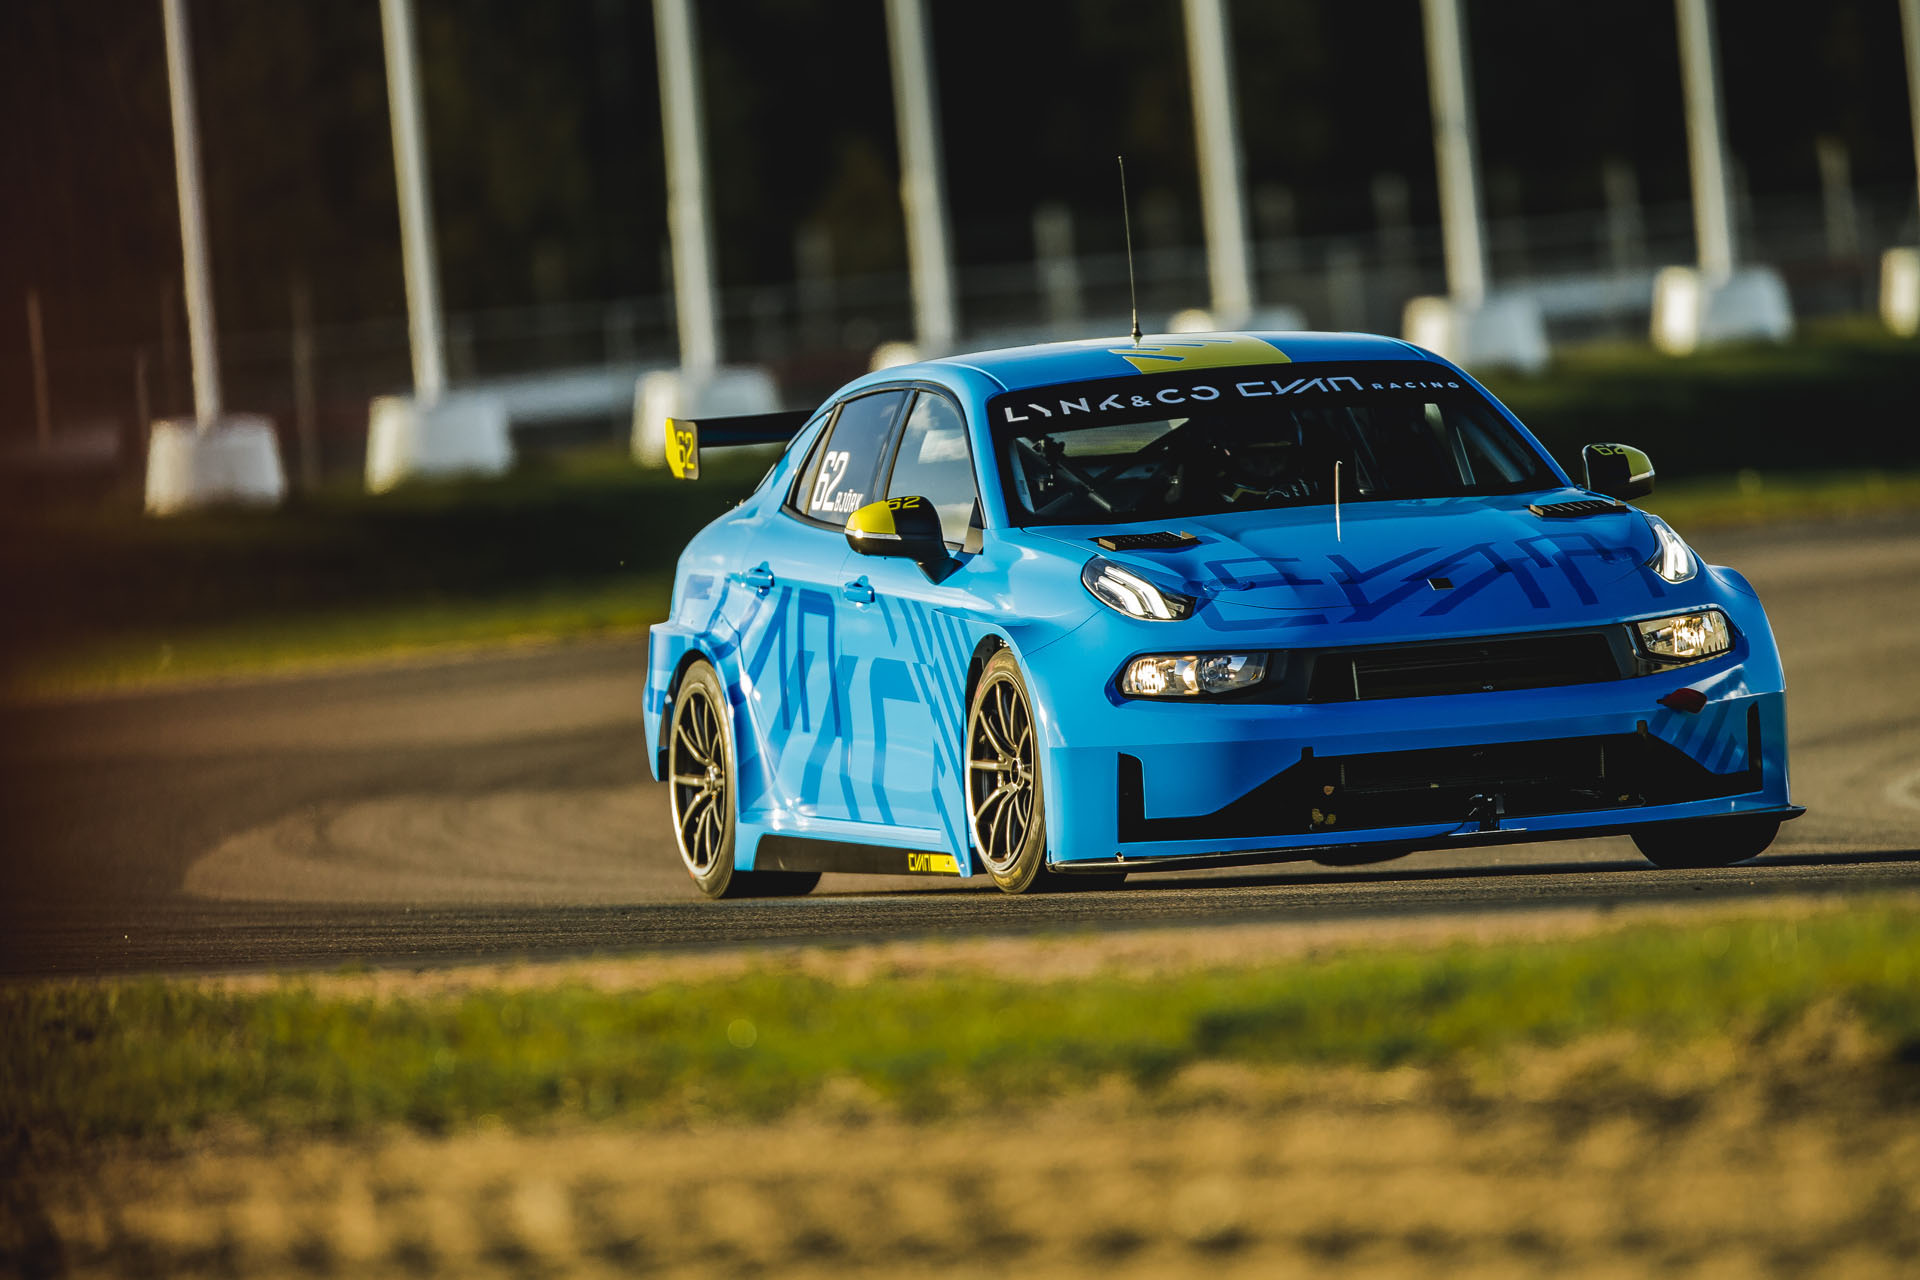 Thed Björk, Mantorp, Lynk & Co Cyan Racing, 22 October, 2018